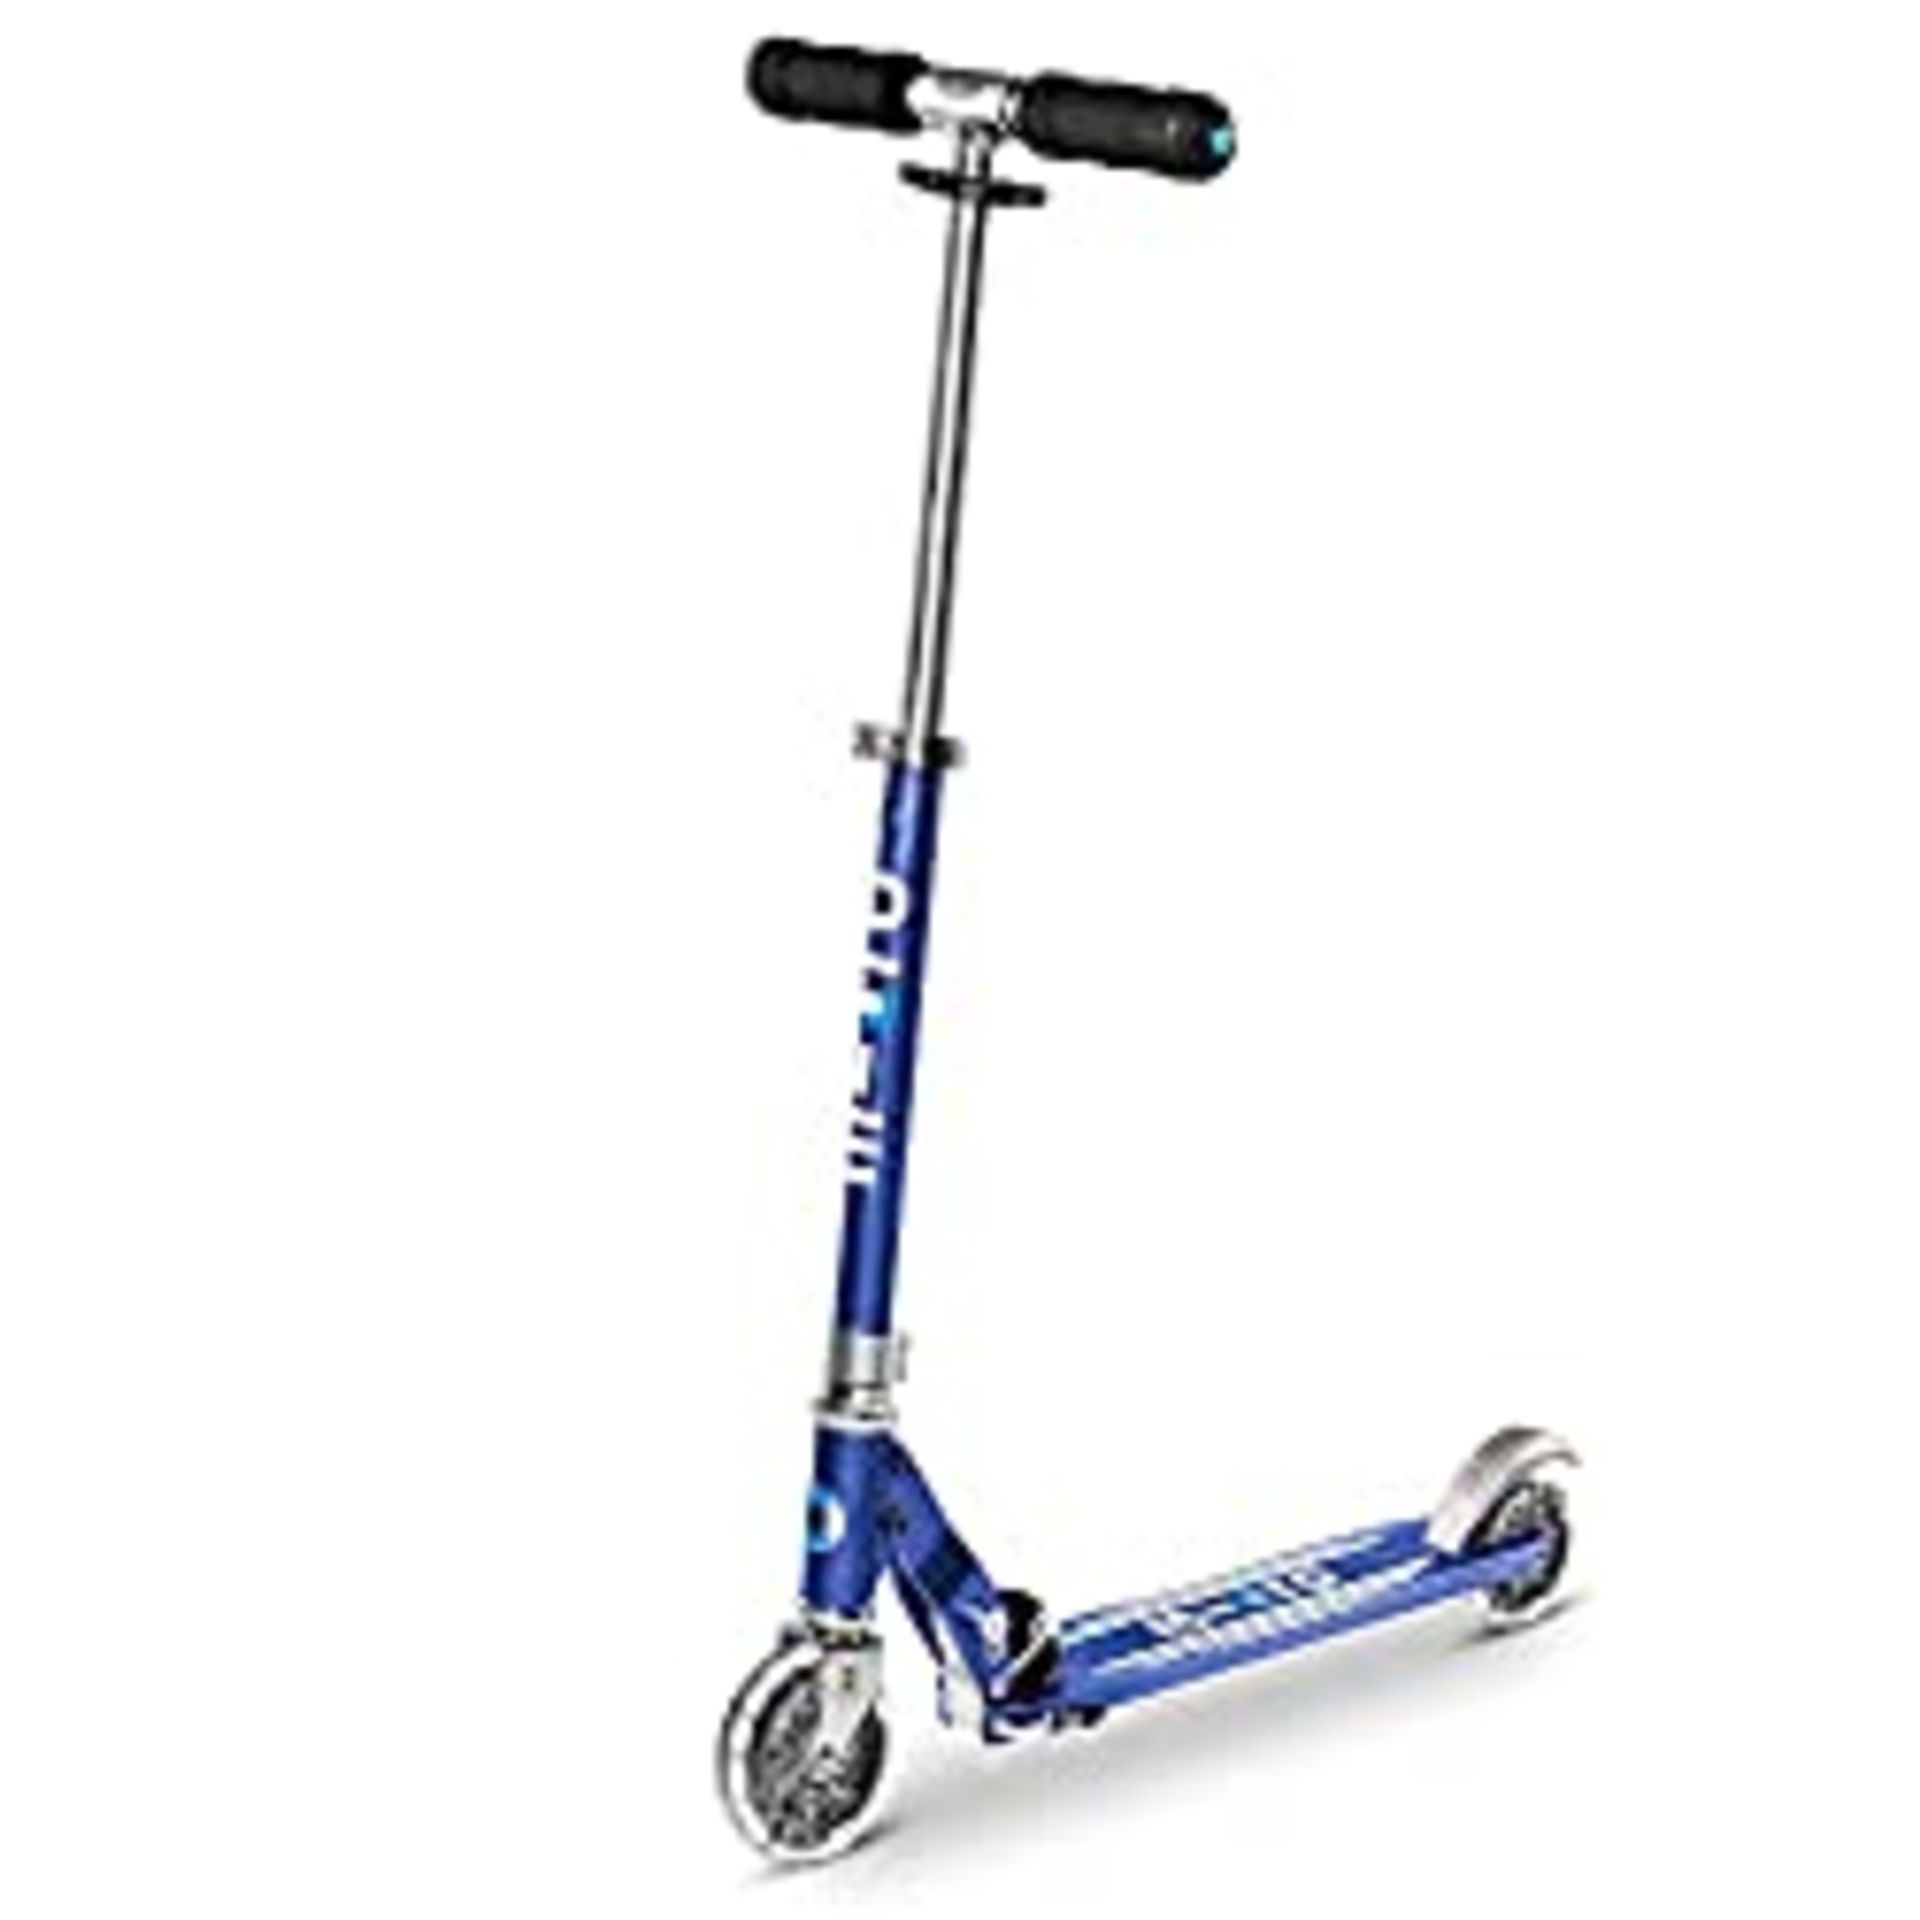 RRP £119.95 Micro Led Folding Sprite Scooter Blue 2 Wheeled Light